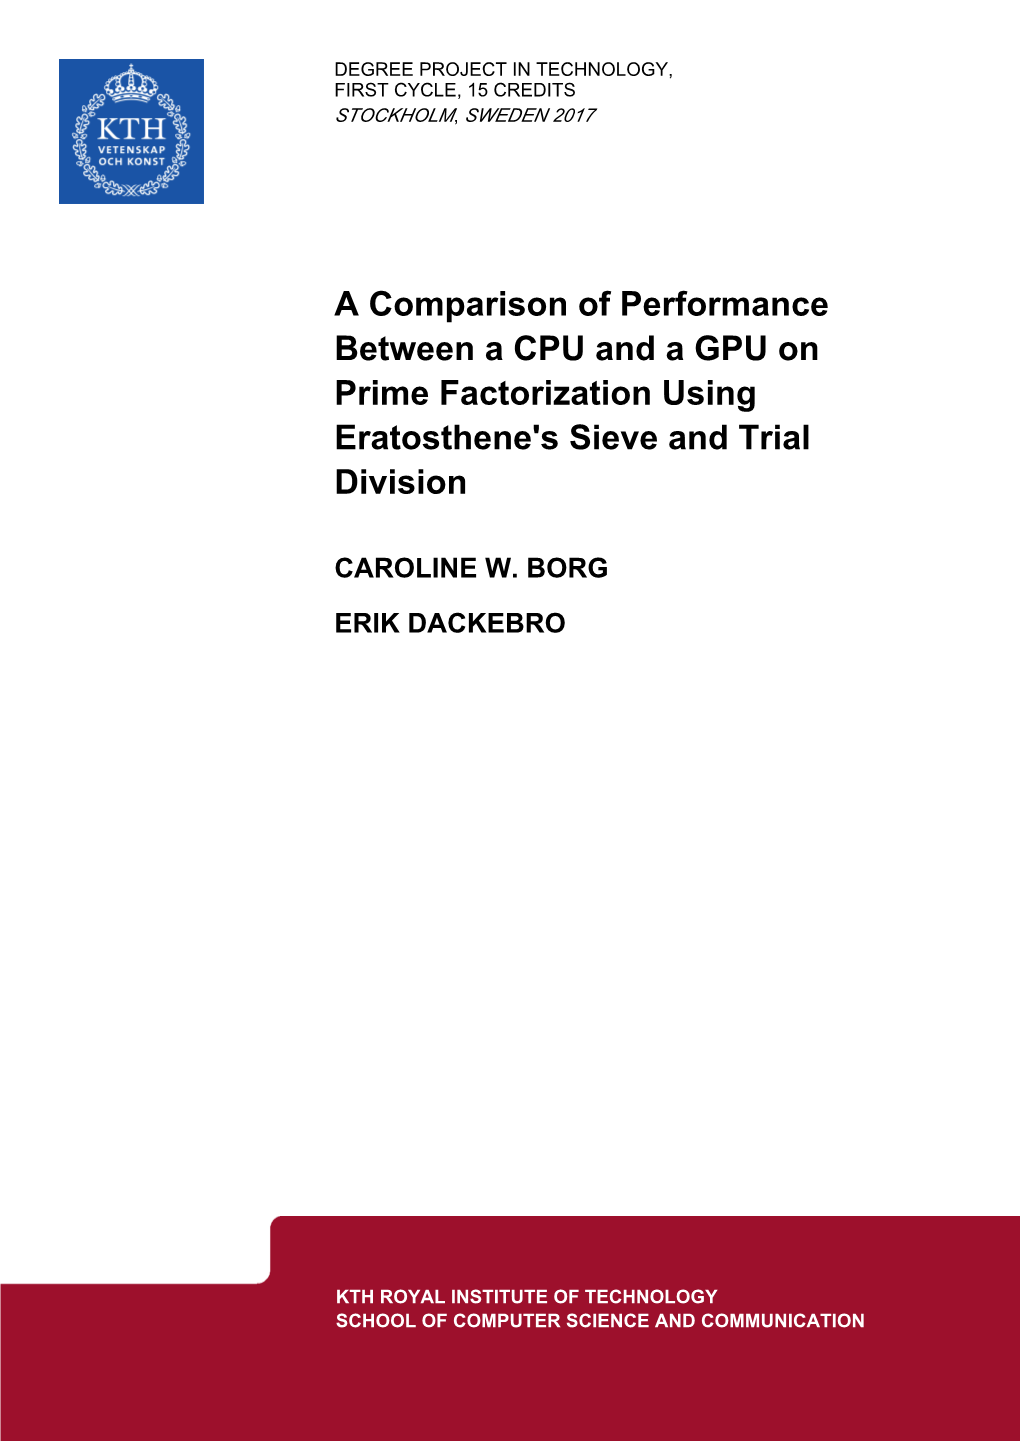 A Comparison of Performance Between a CPU and a GPU on Prime Factorization Using Eratosthene's Sieve and Trial Division